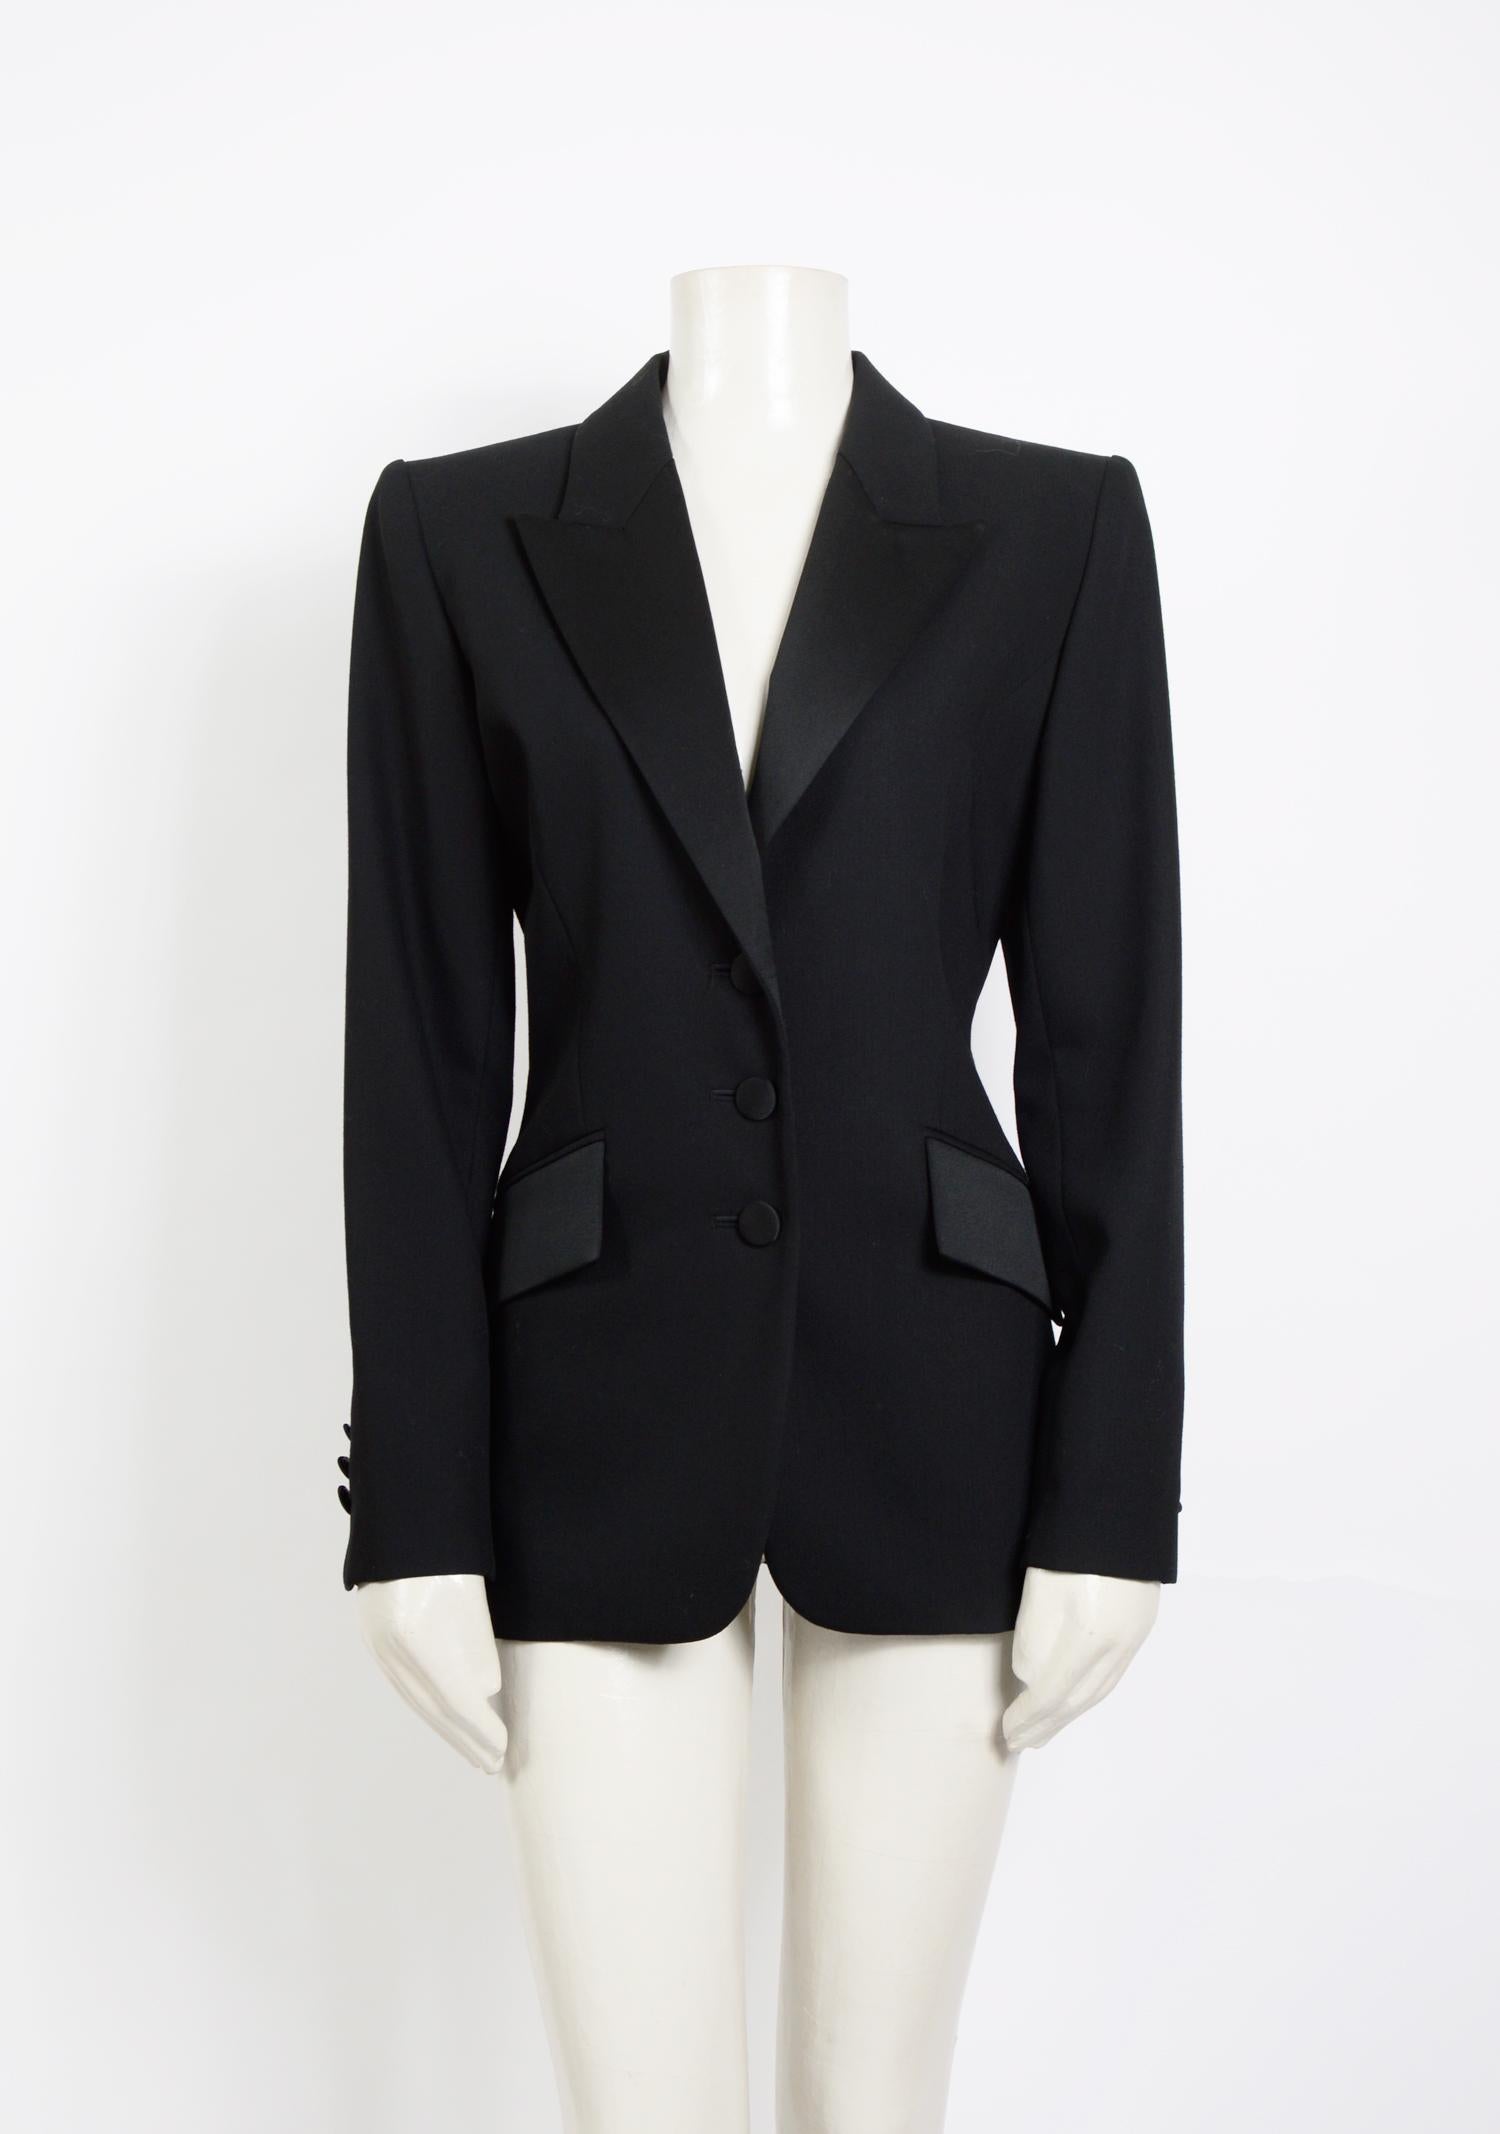 Stunning Yves Saint Laurent black tuxedo/smoking jacket & skirt suit.
Made in France - French size 36 - Us size 4 - 100% wool and both pieces lined.
However, we strongly advise using the given measurements for the perfect fit.
Measurements are taken